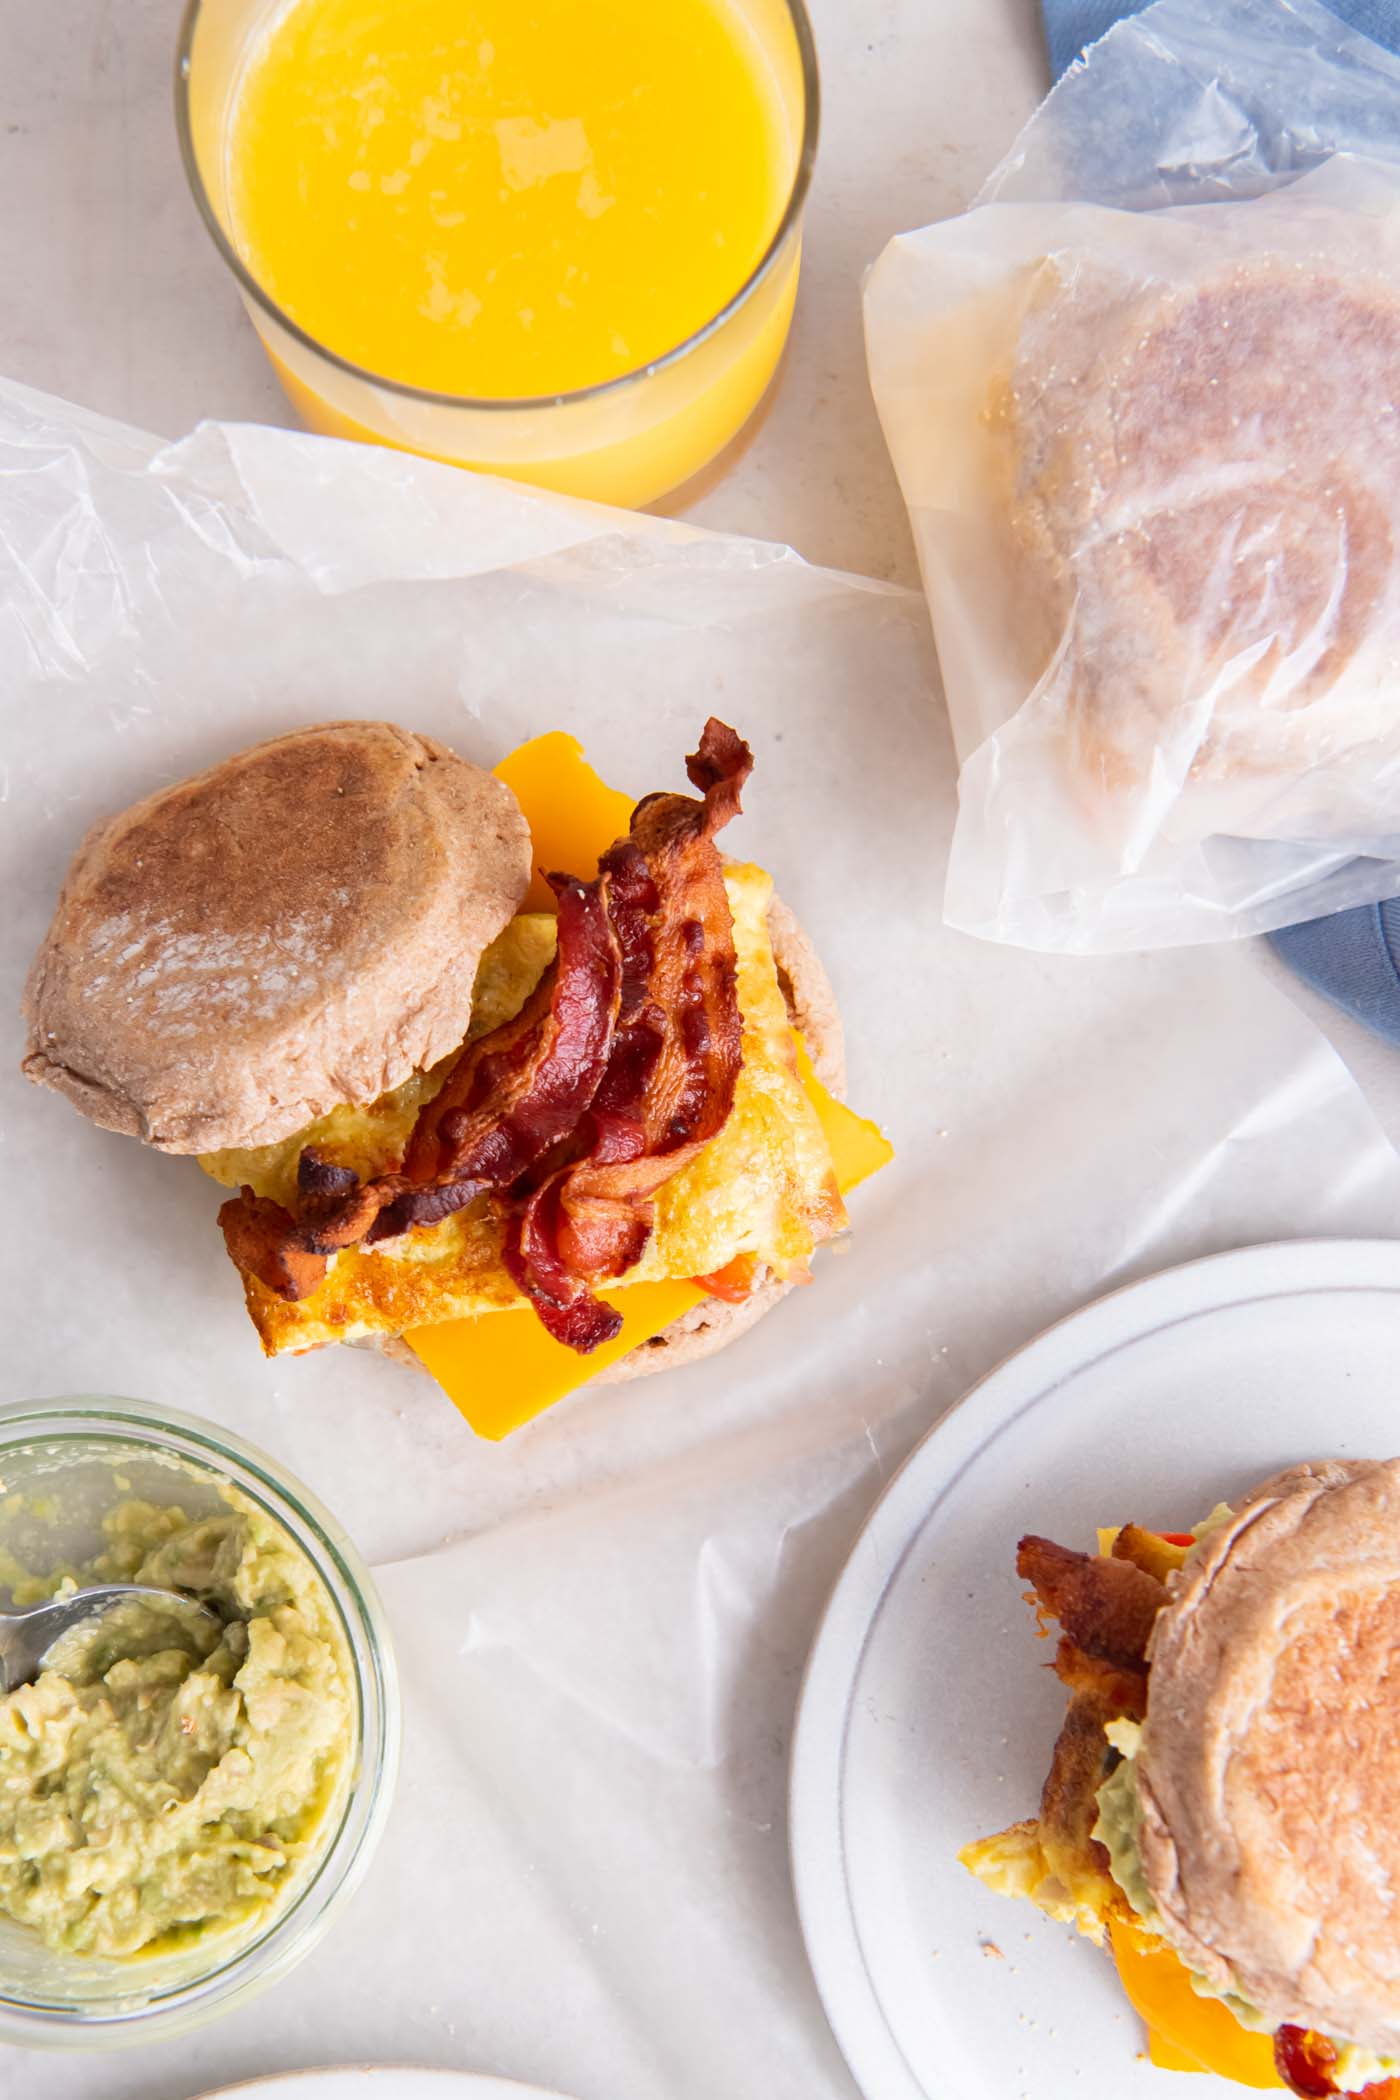 Breakfast sandwich with bacon, unwrapped and wrapped in waxed paper with glass of orange juice nearby.